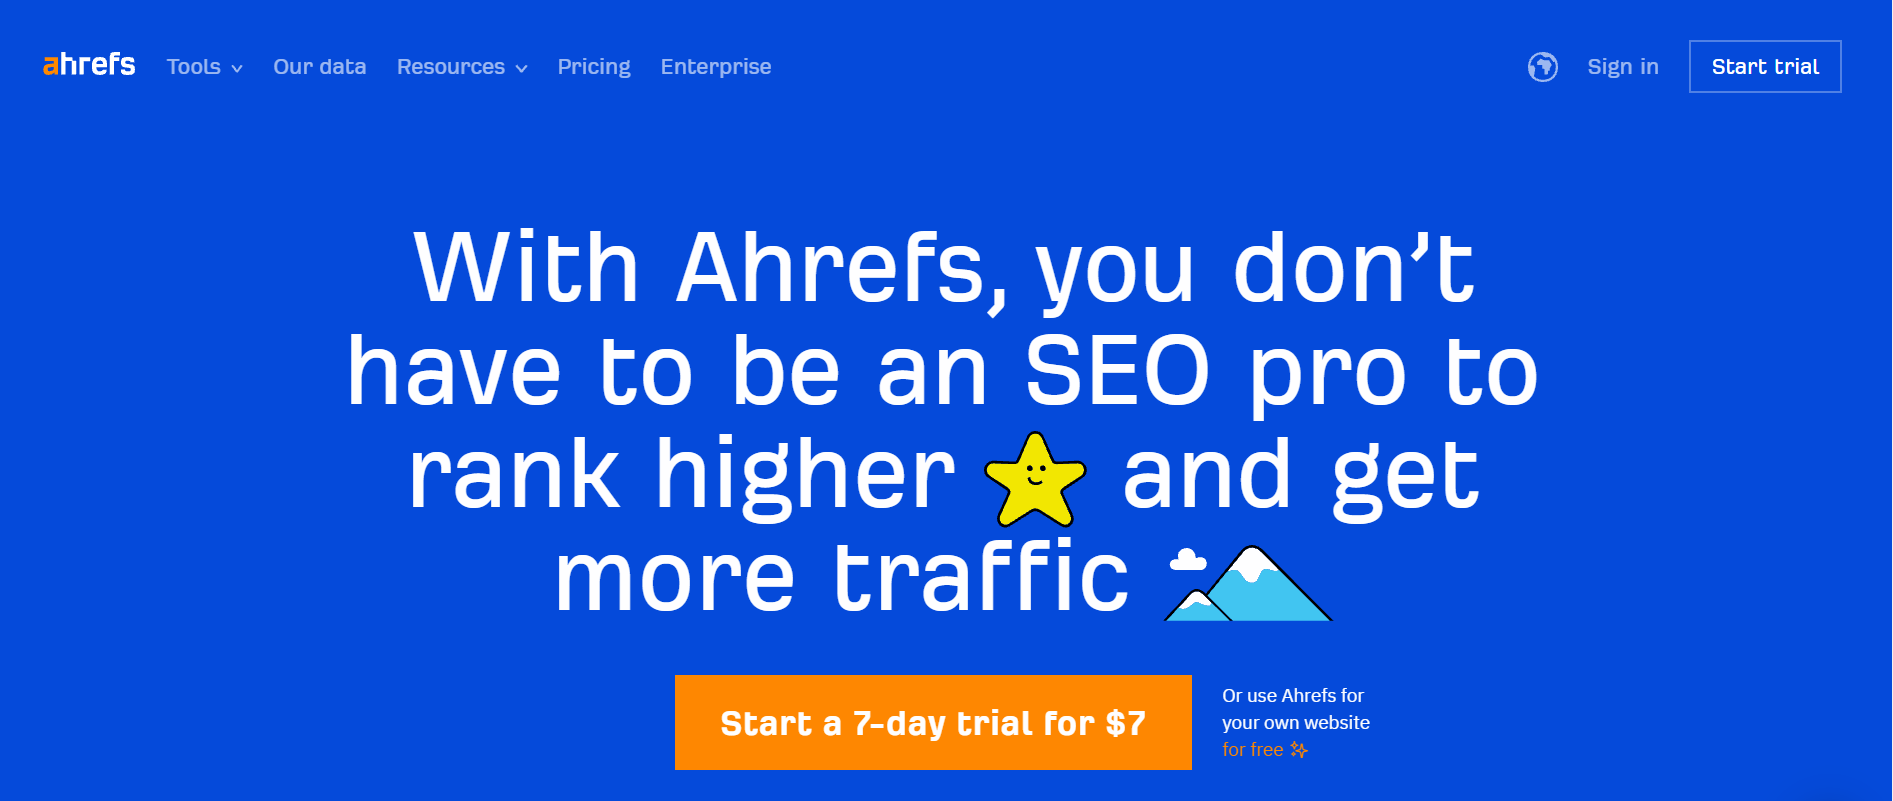  Ahrefs homepage showing brand promise text